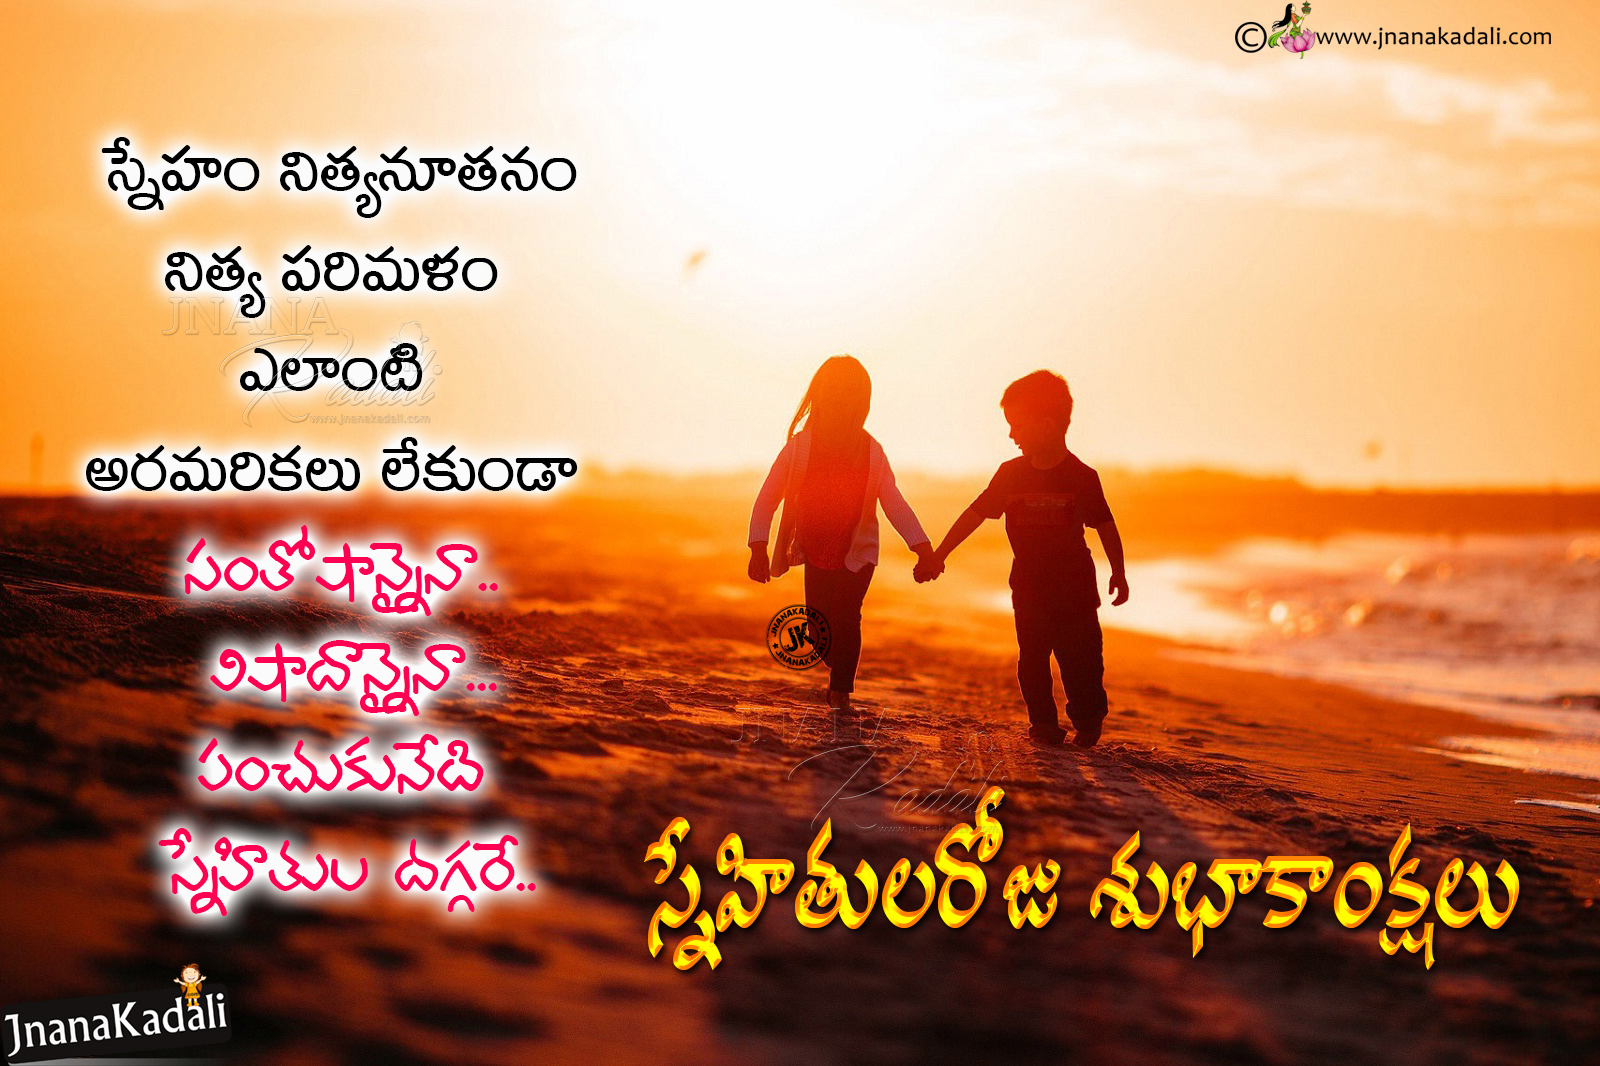 Happy Friendship Day 2018 Greetings wallpapers in Telugu With Cute ...